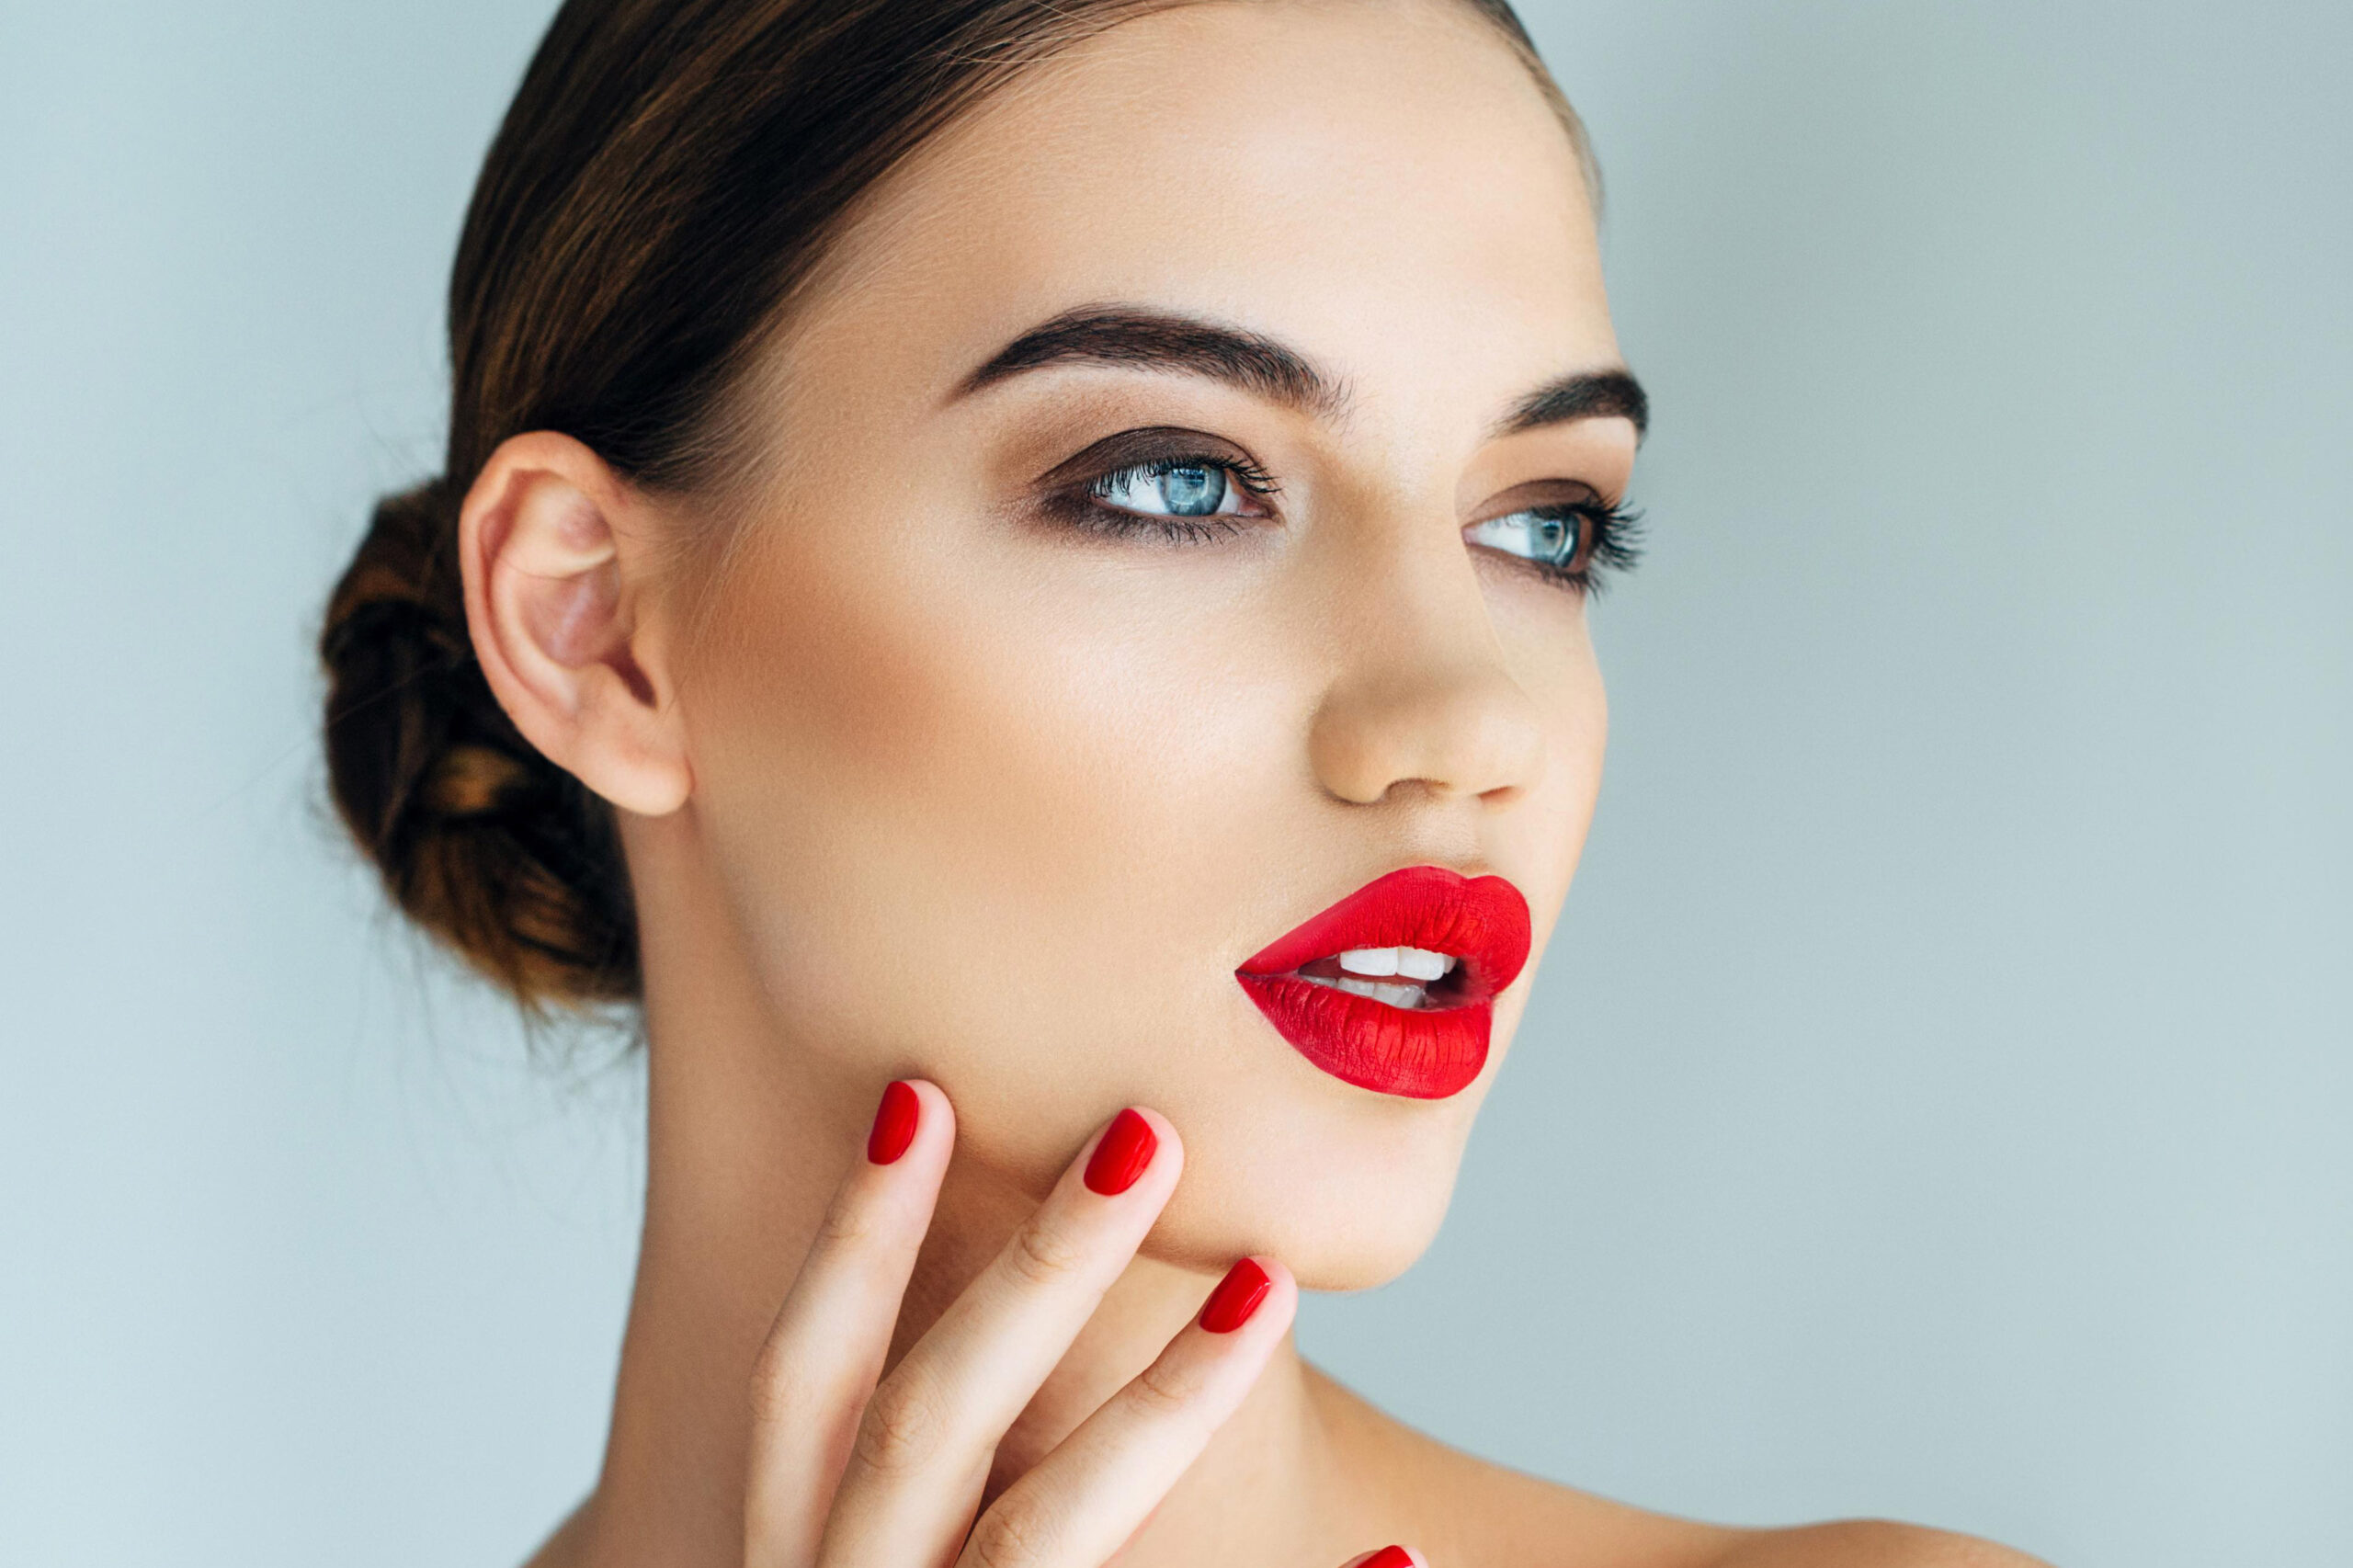 Woman with red lipstick and nails